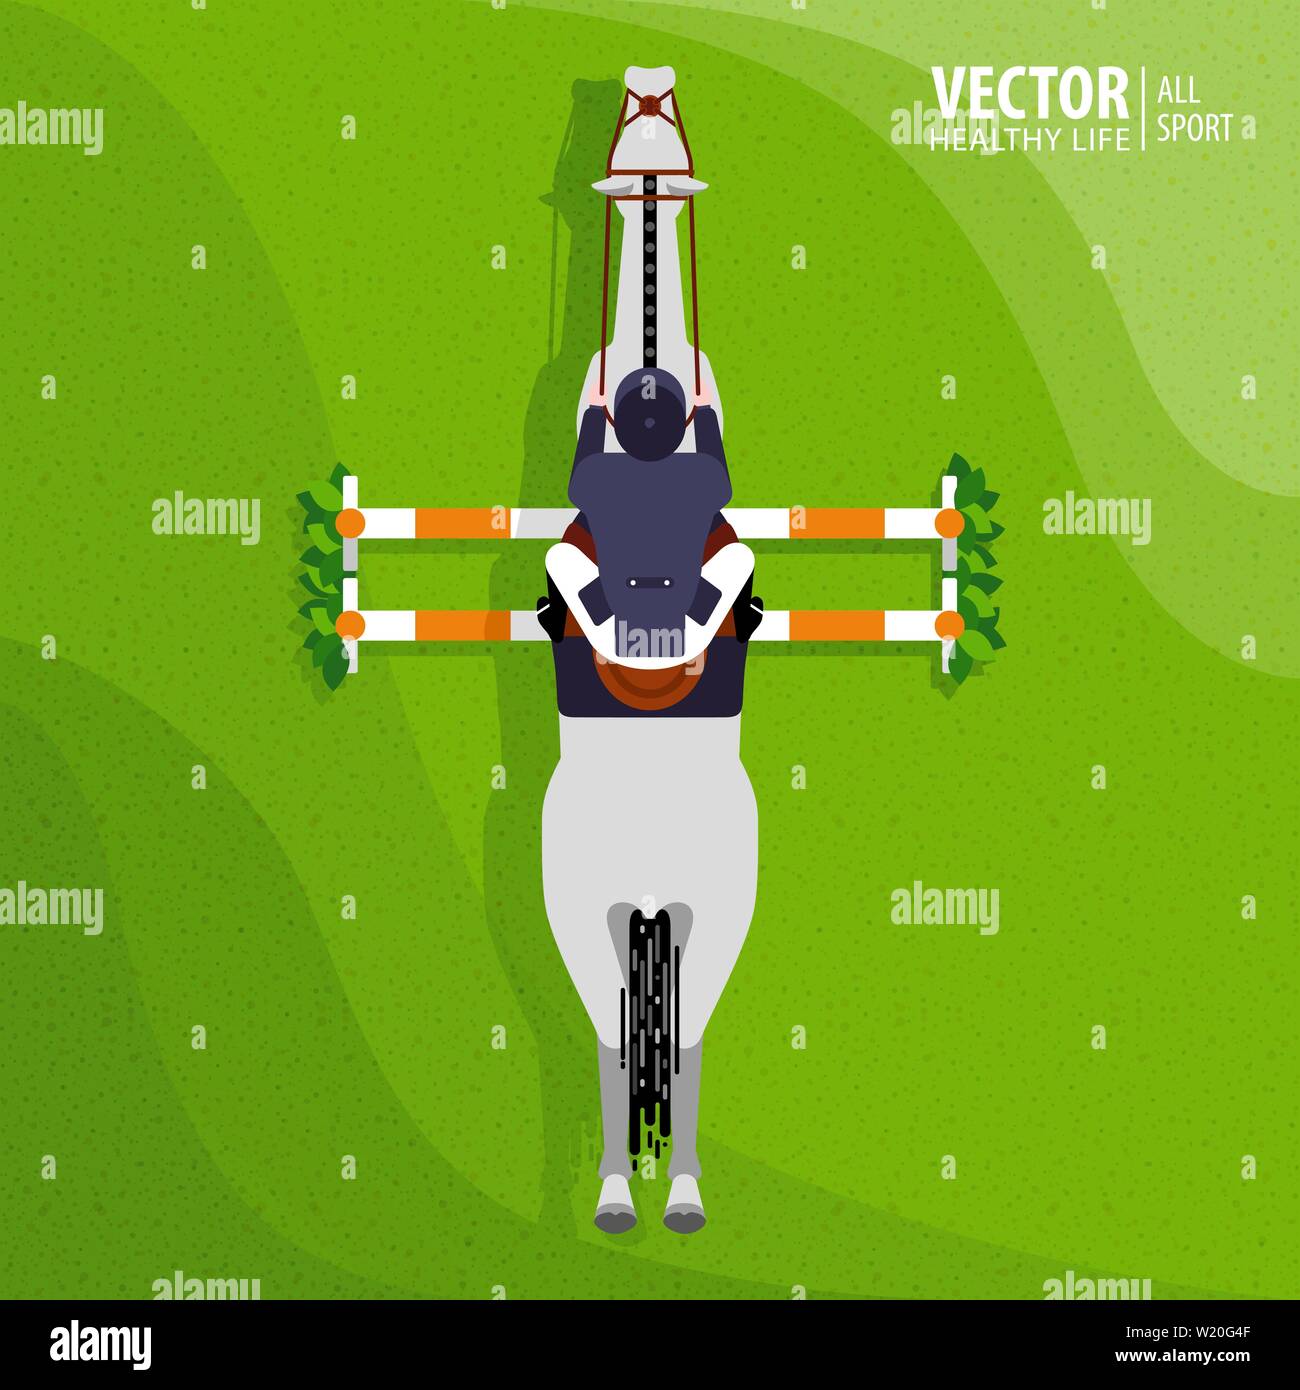 Equestrian sport. Poster. Jockey riding jumping horse. Competitions. Top view. Vector illustration Stock Vector